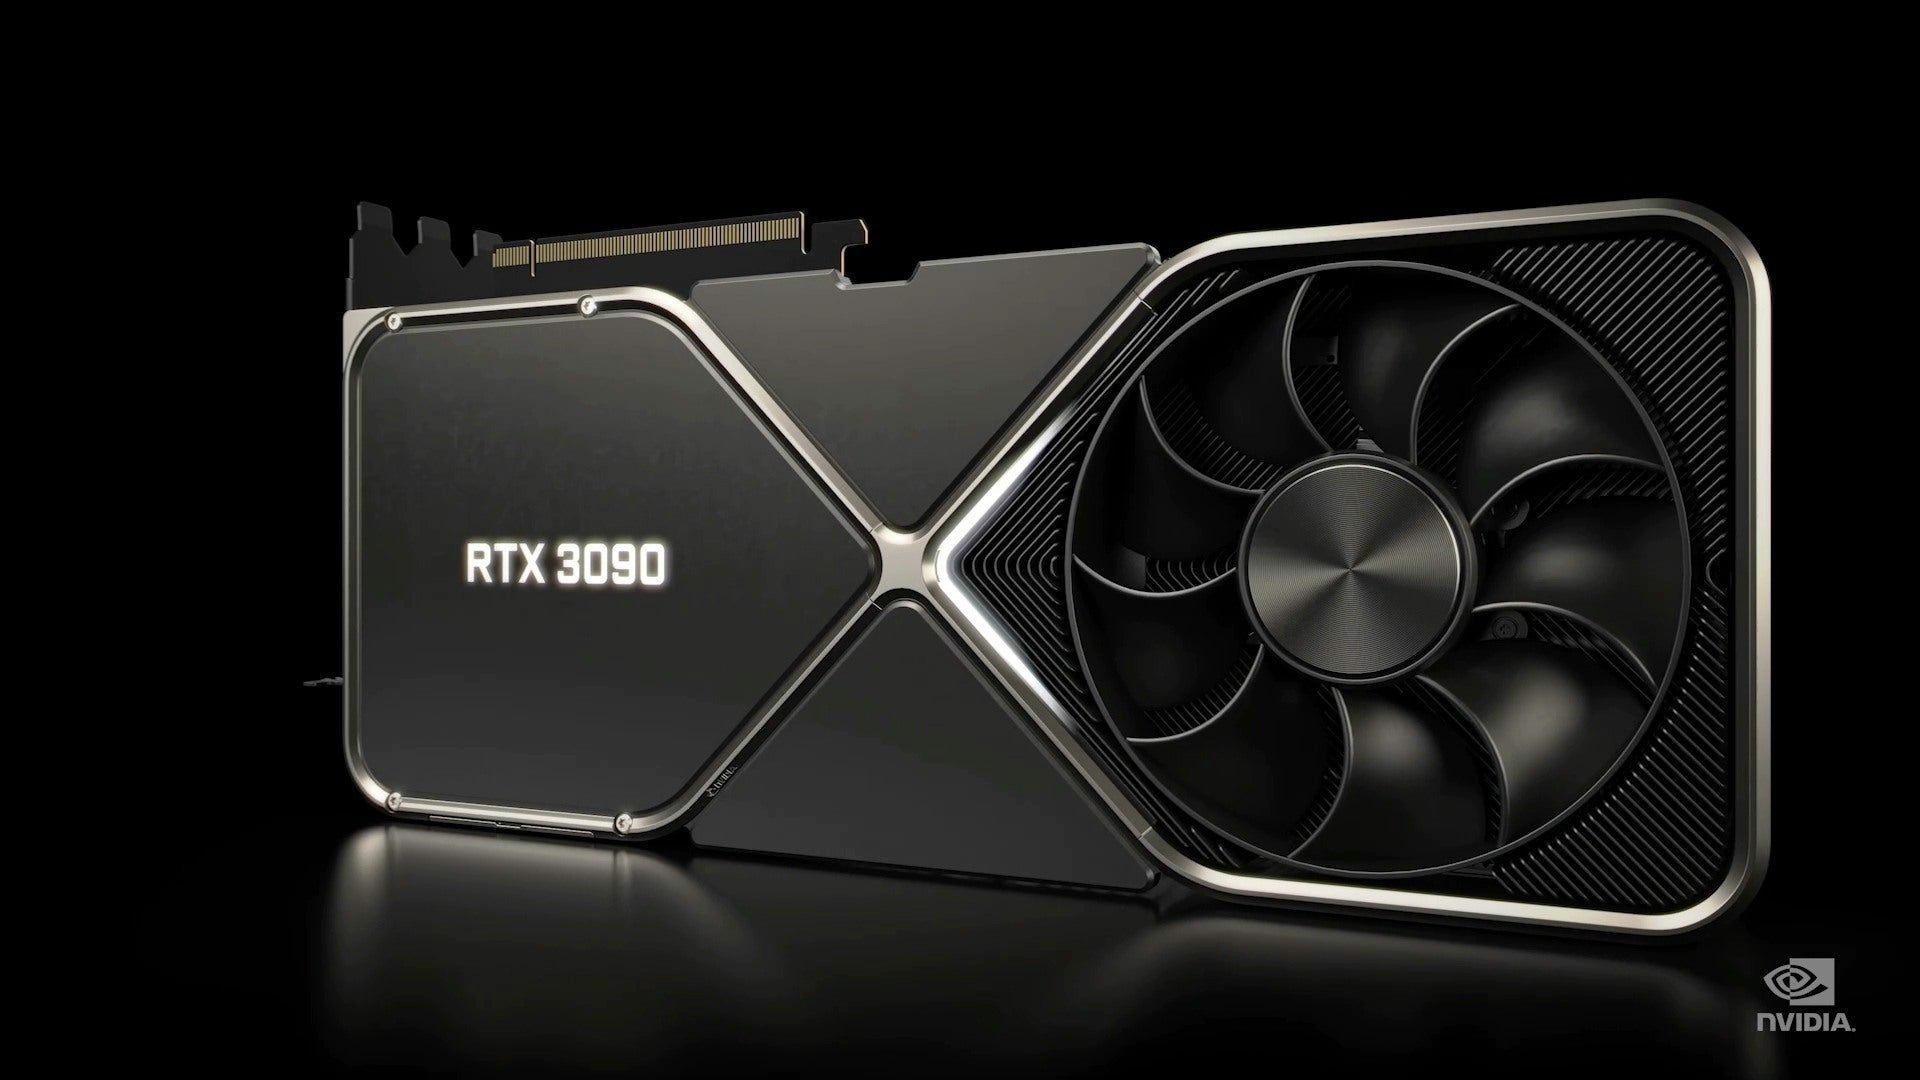 Nvidia Announces New GeForce RTX 3080 Graphics Cards